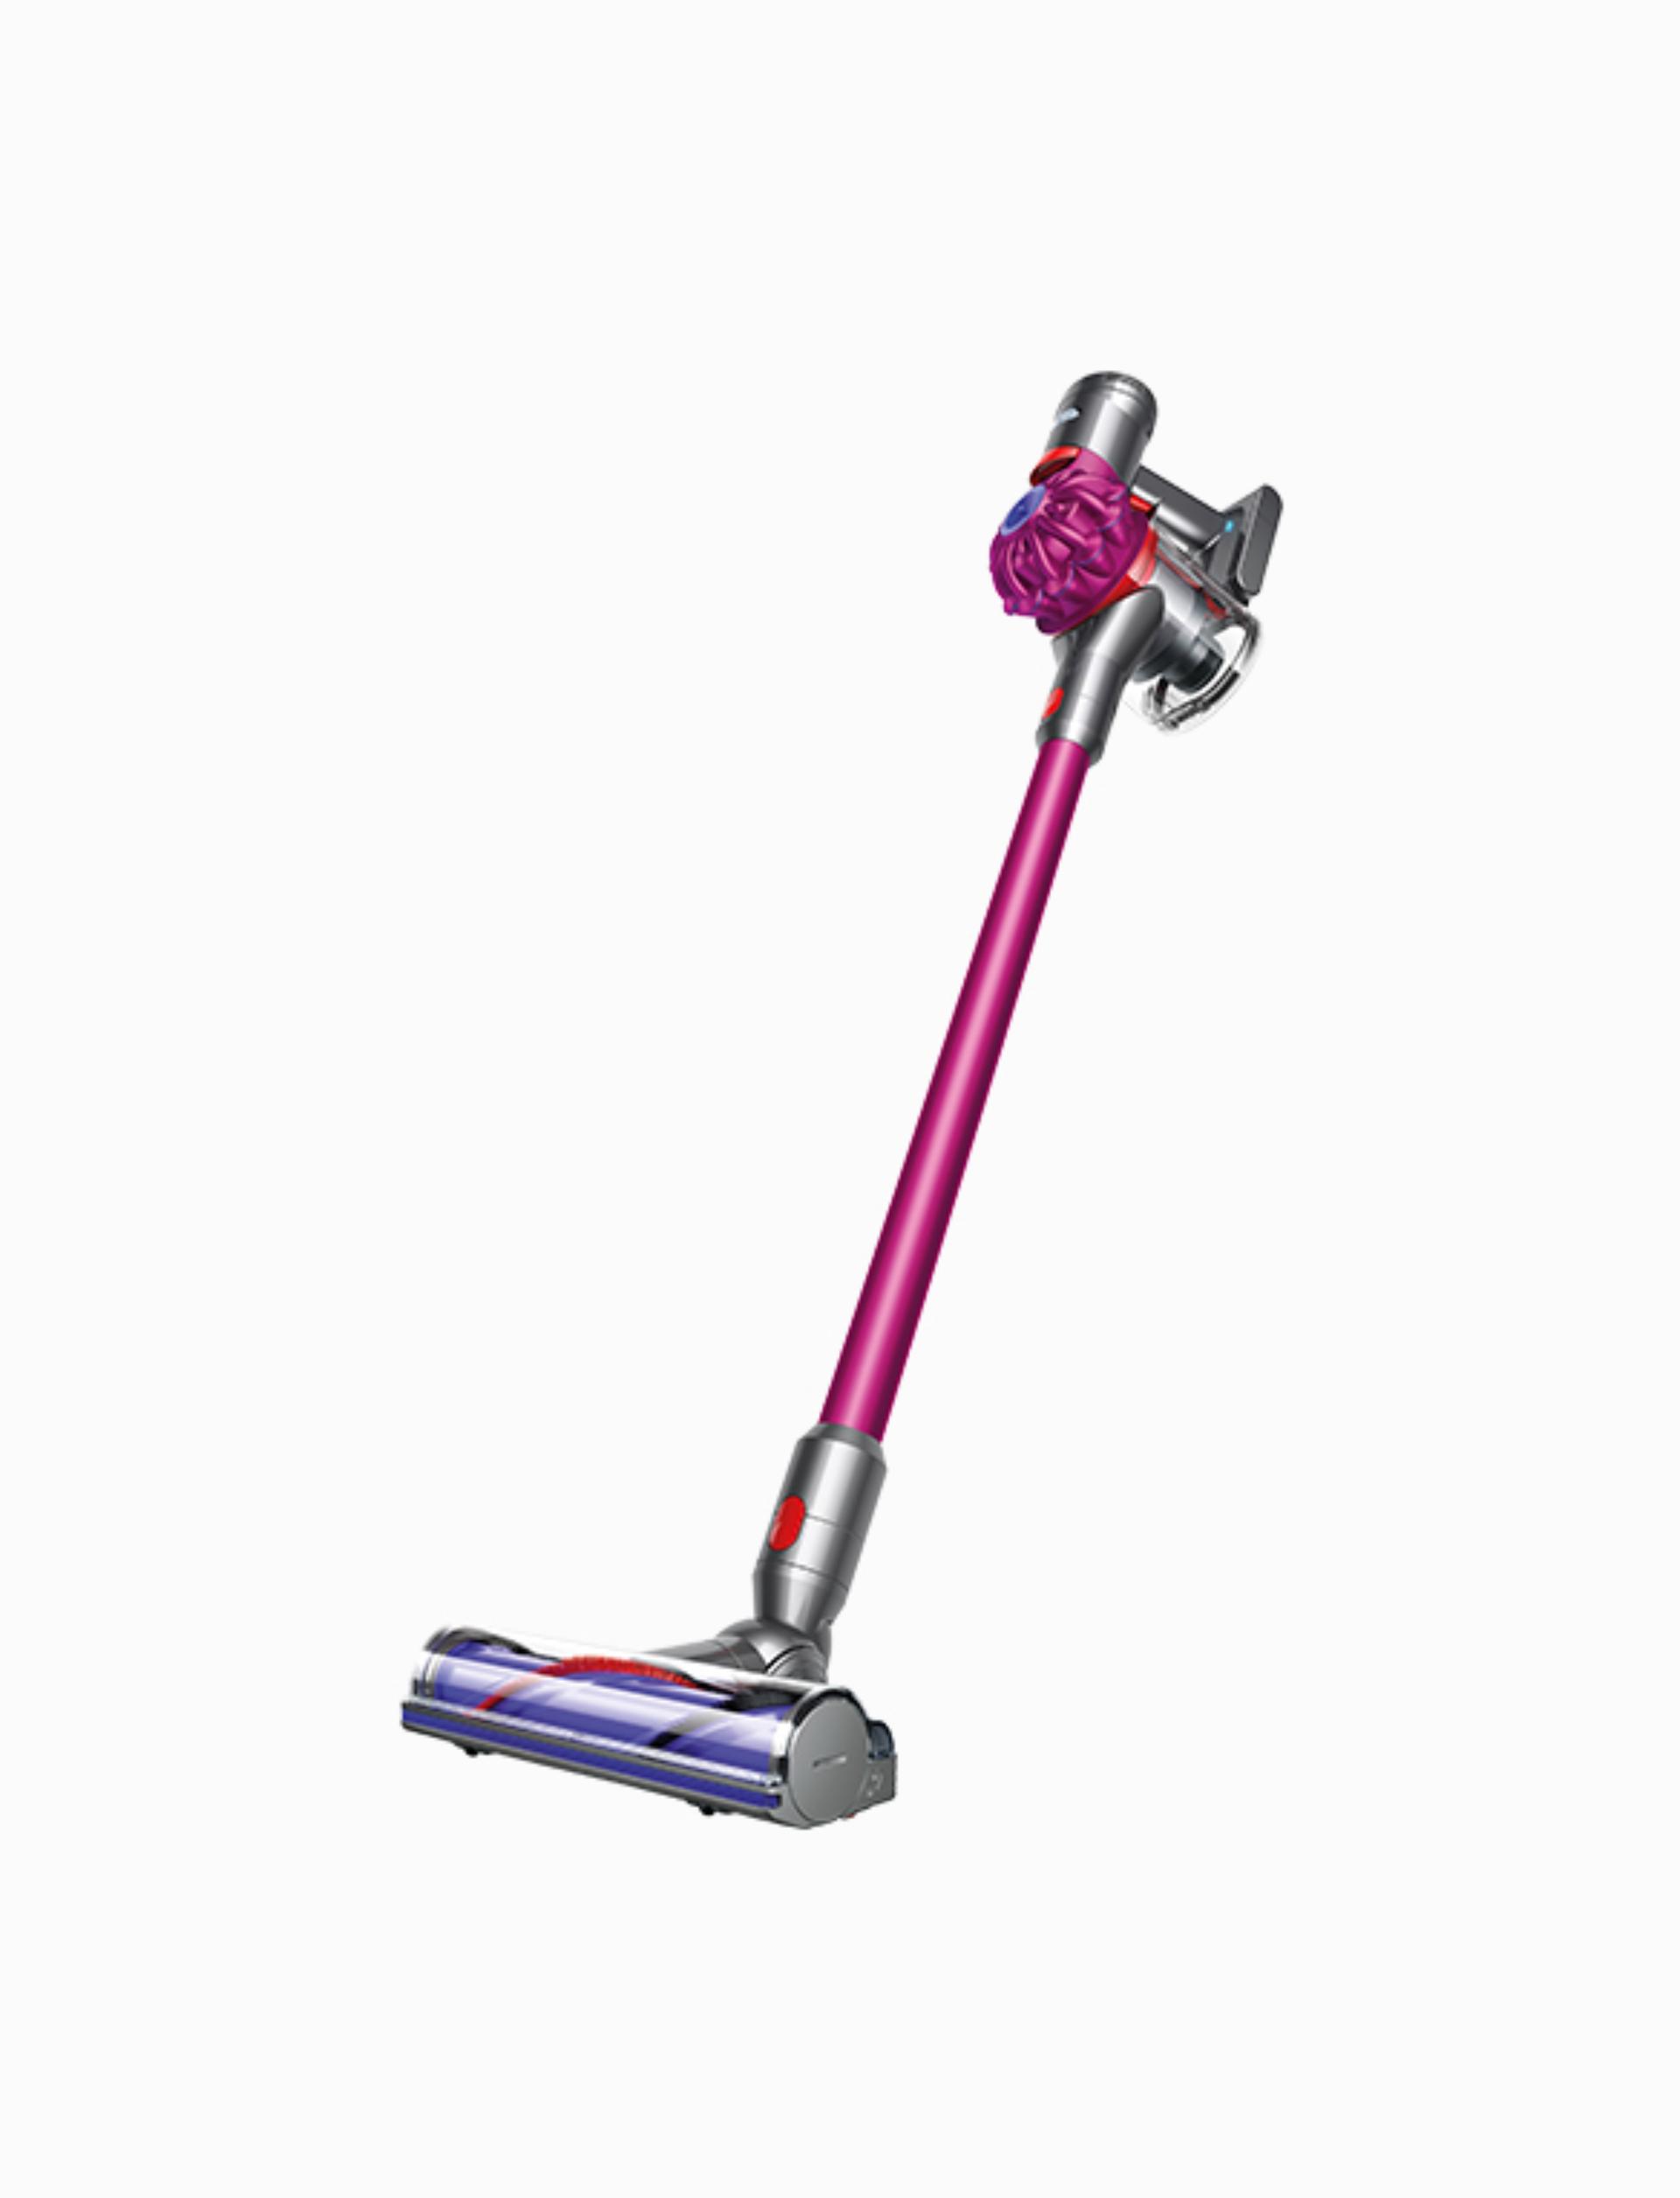 Find Your User Guide & Manual | Dyson Australia